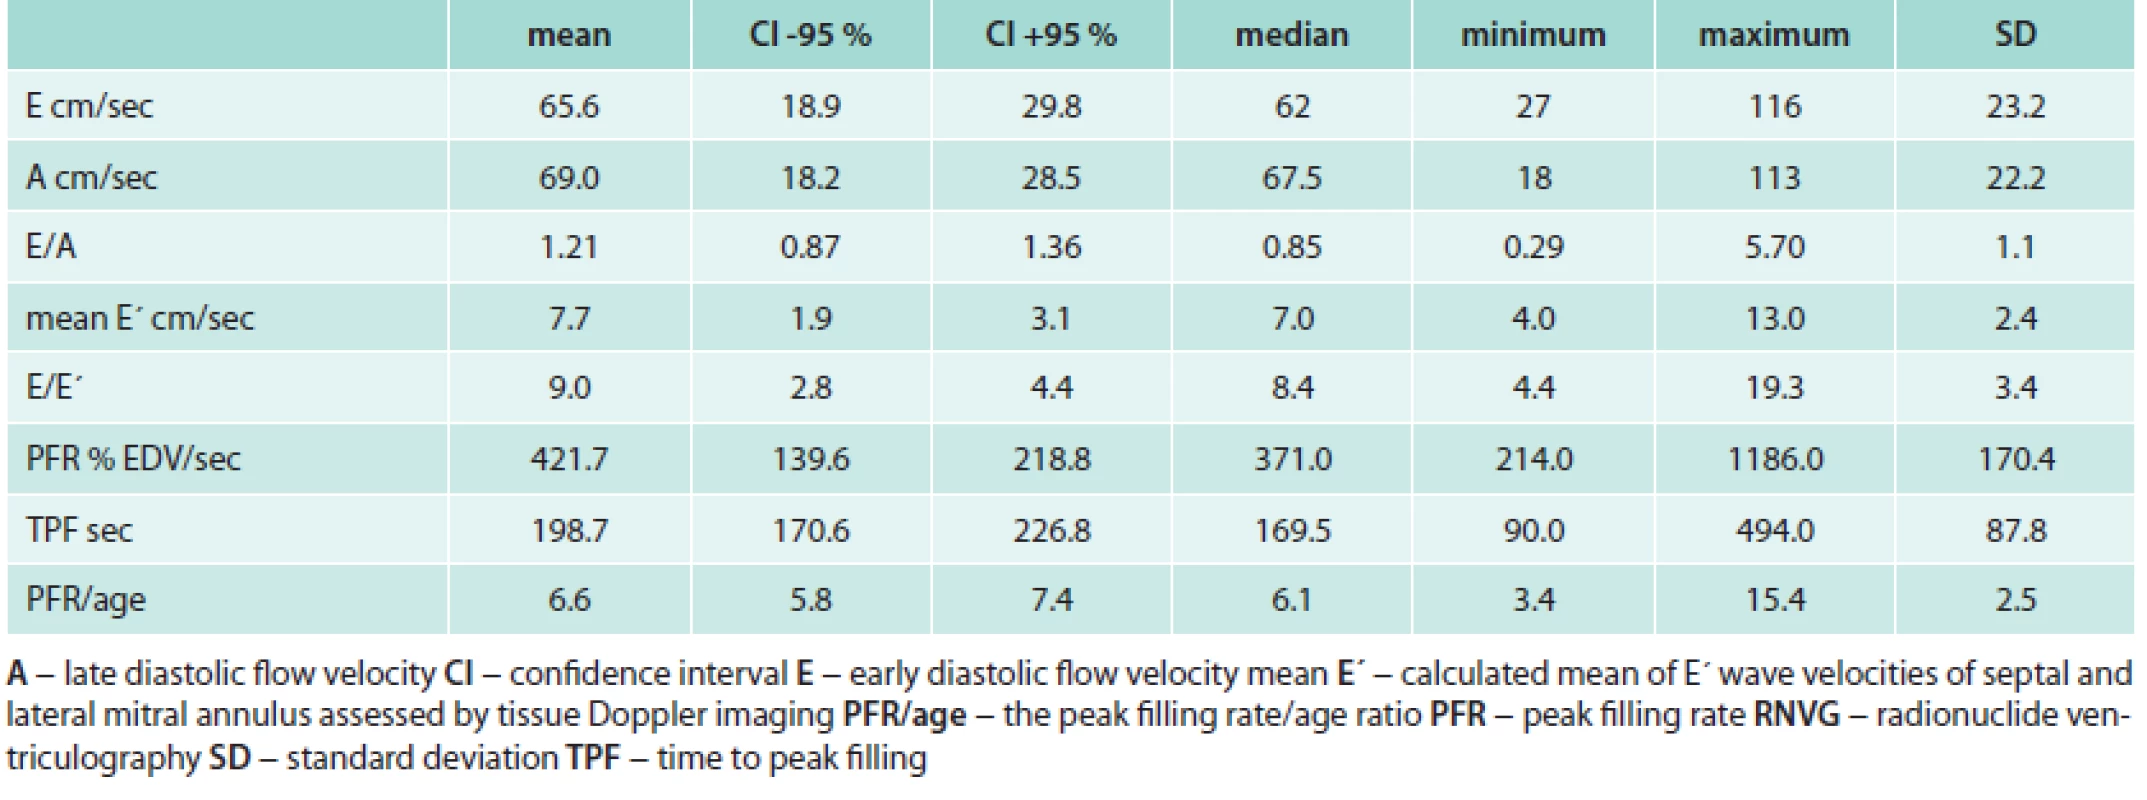 Parameters of diastolic function as assessed with Doppler echocardiography and radionuclide ventriculography